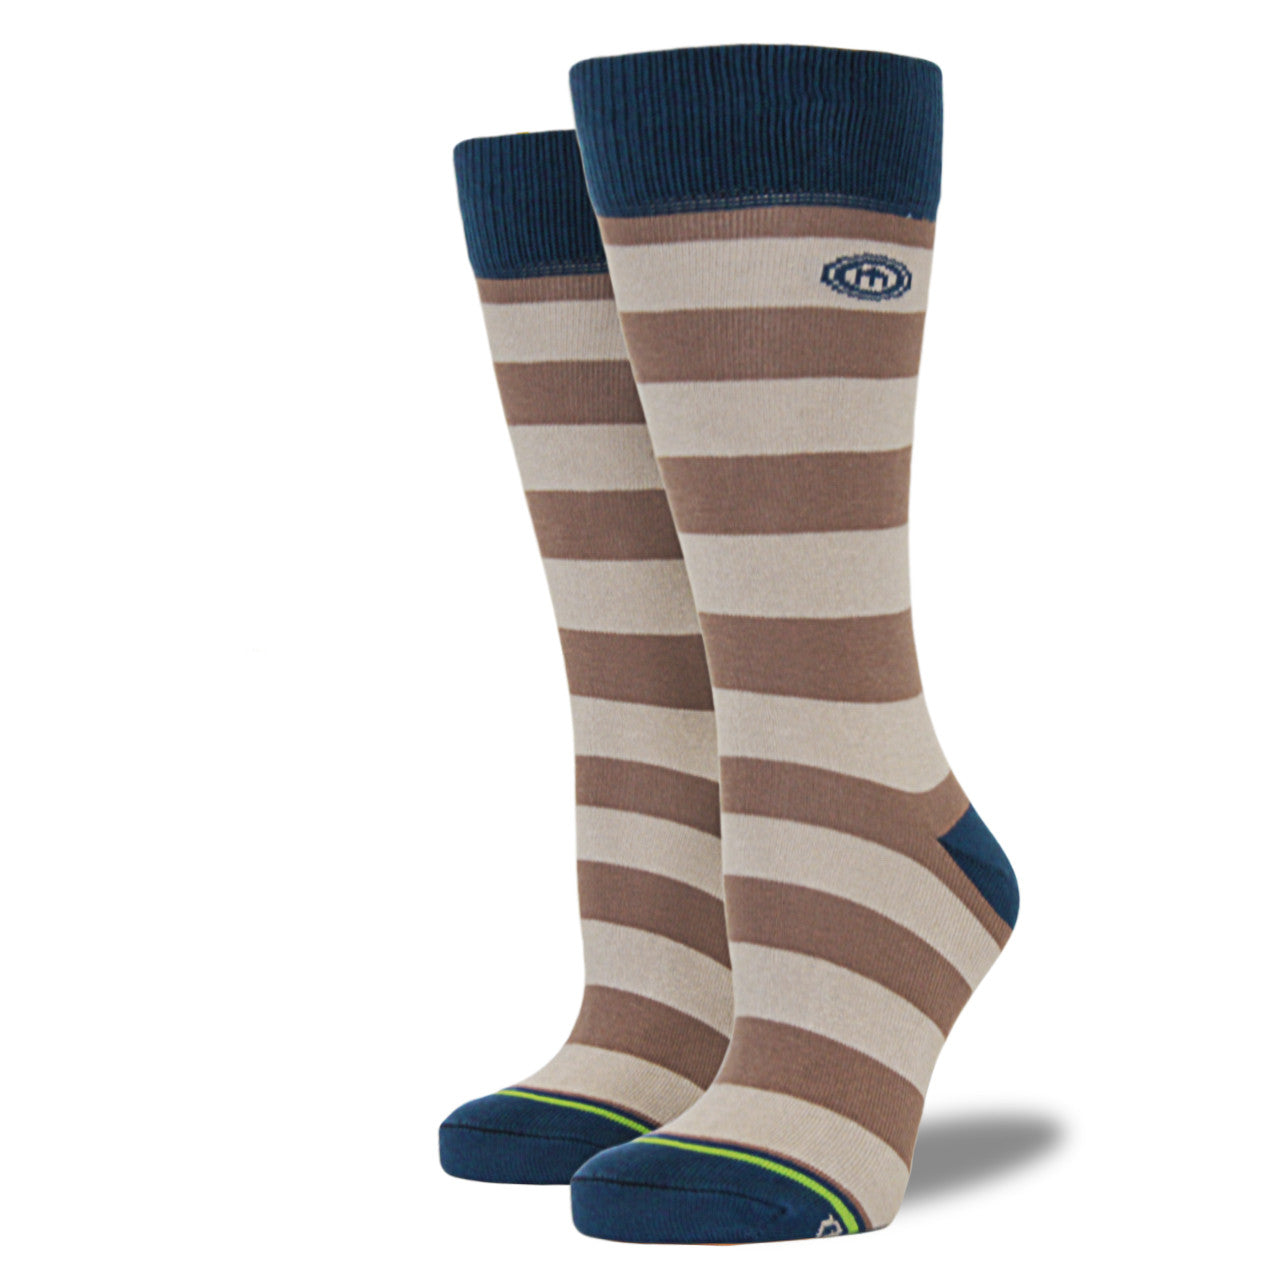 Stylish Women's Socks from Mitscoots - Mitscoots Outfitters